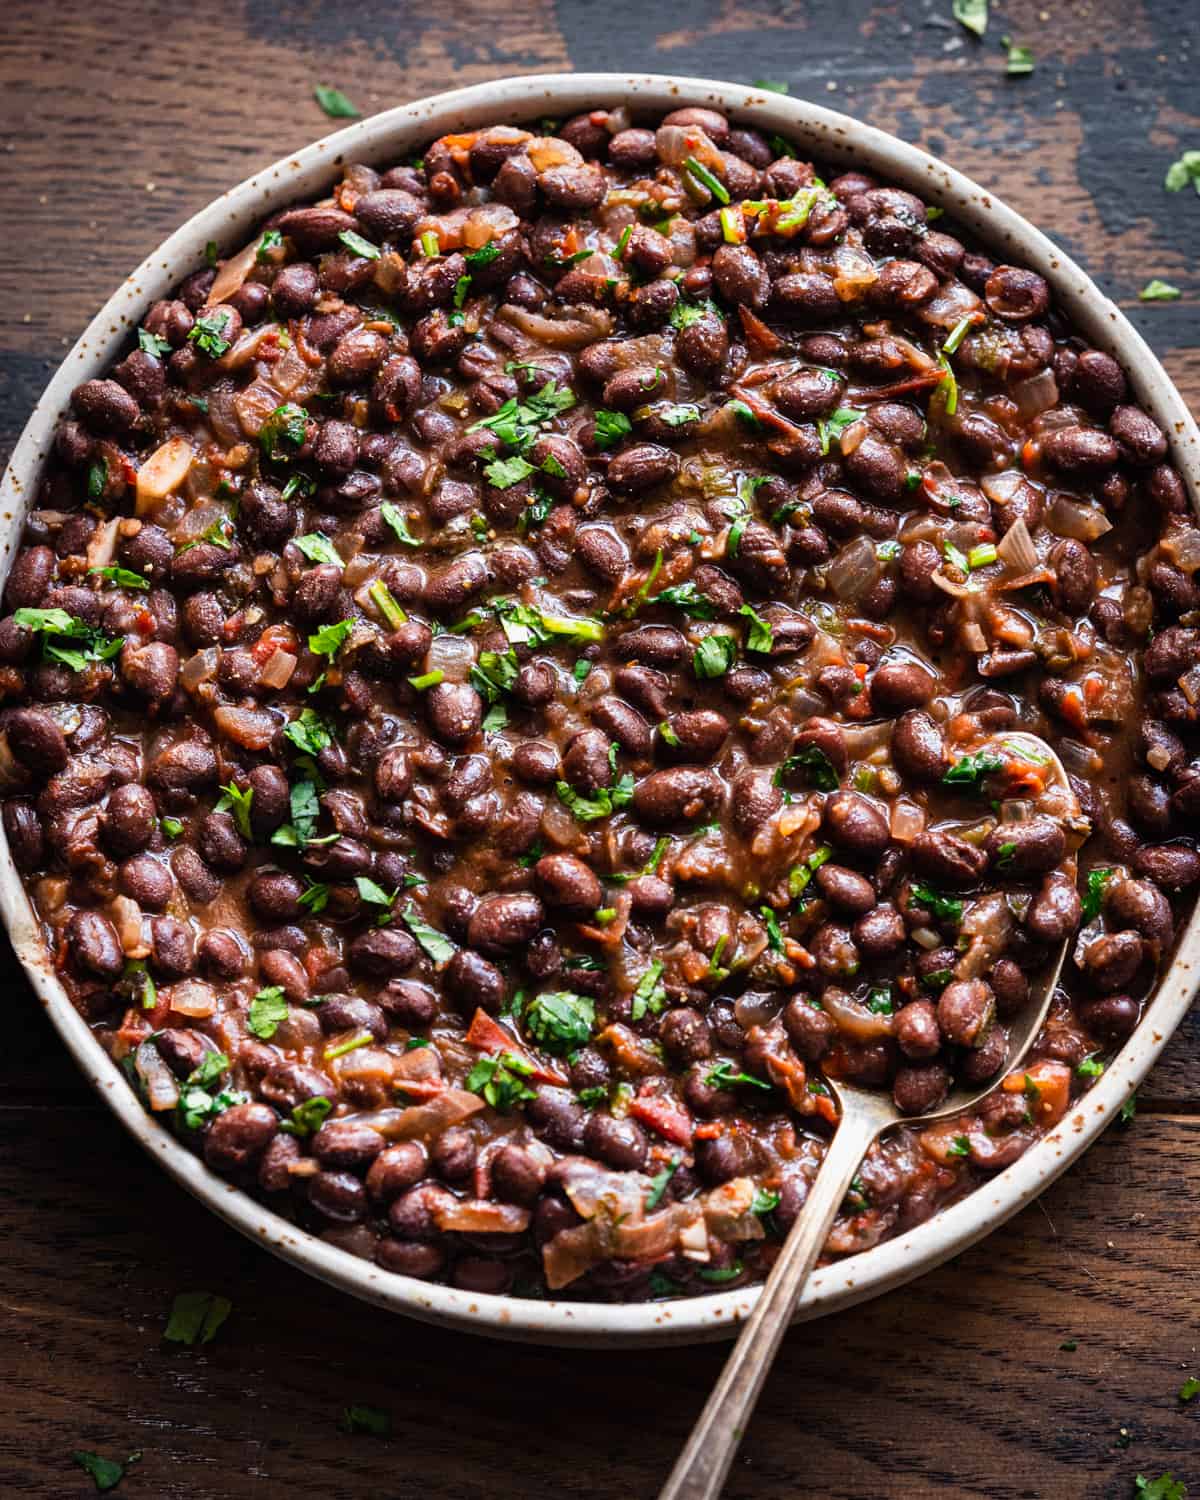 Overhead close up of shallow tan bowl filled with black beans on a wooden table.